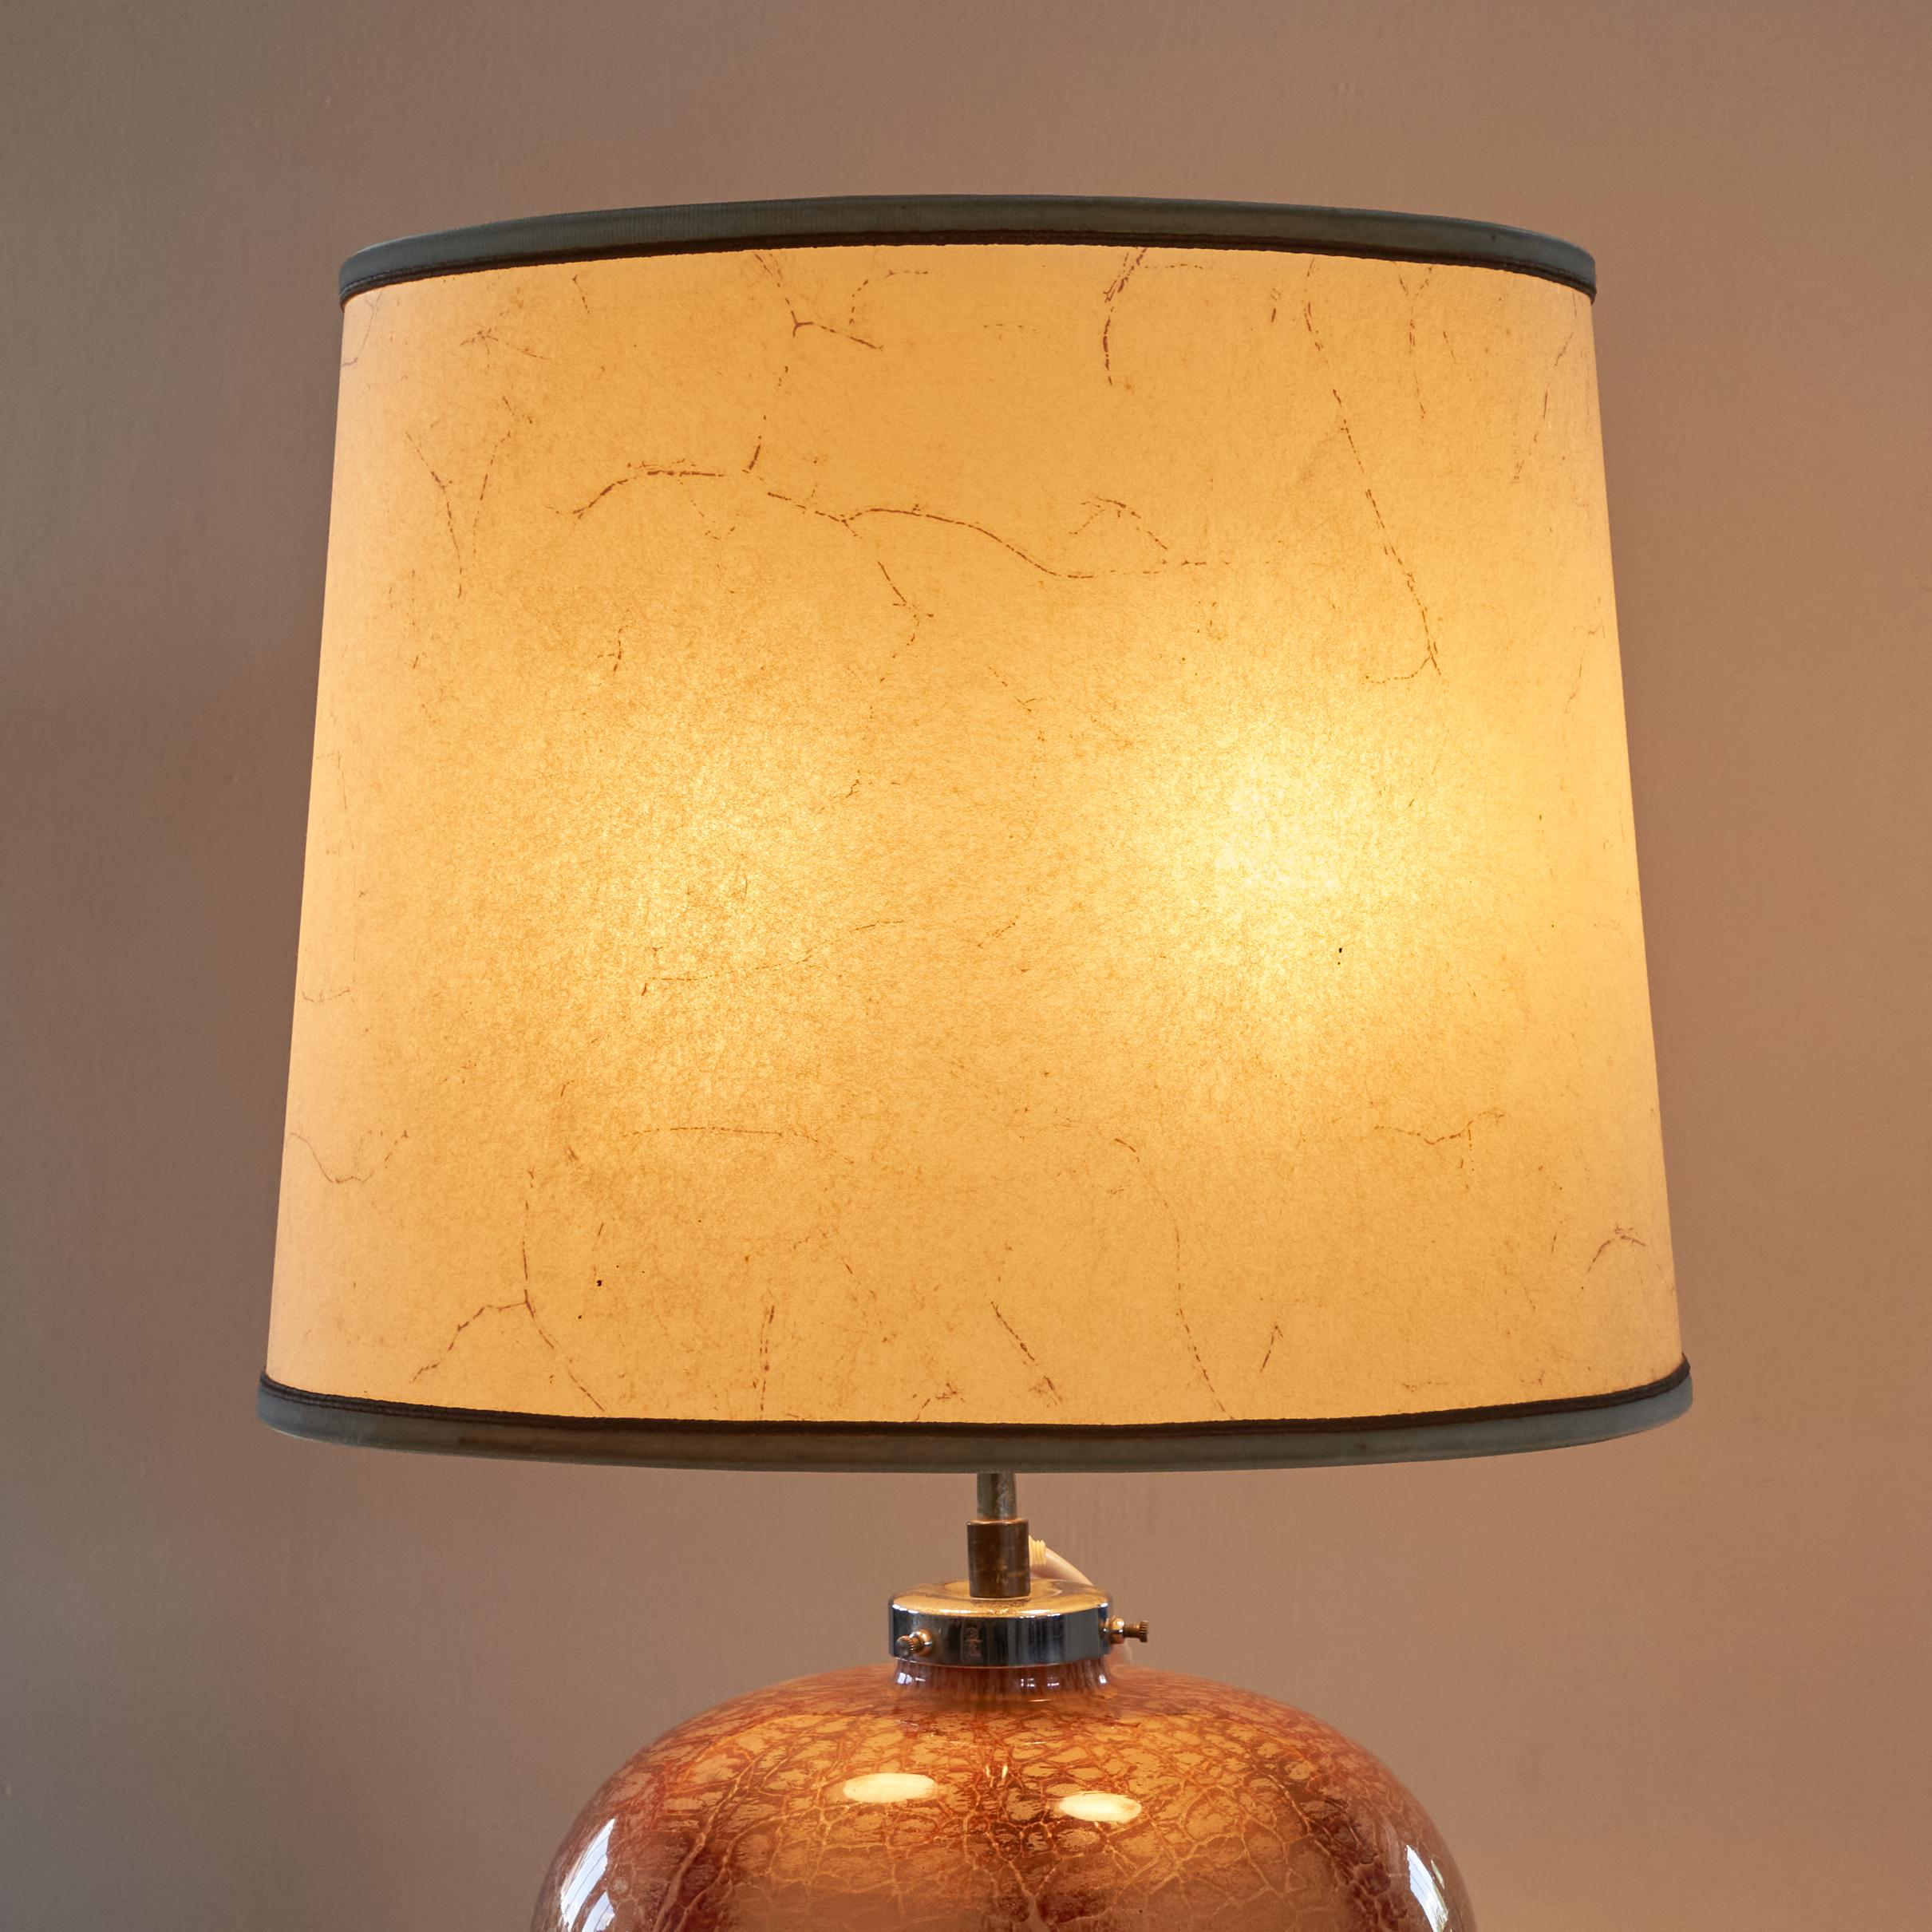 Karl Wiedmann Art Deco WMF Table Lamp in Art Glass with Original Shade 1930s In Good Condition For Sale In Tilburg, NL